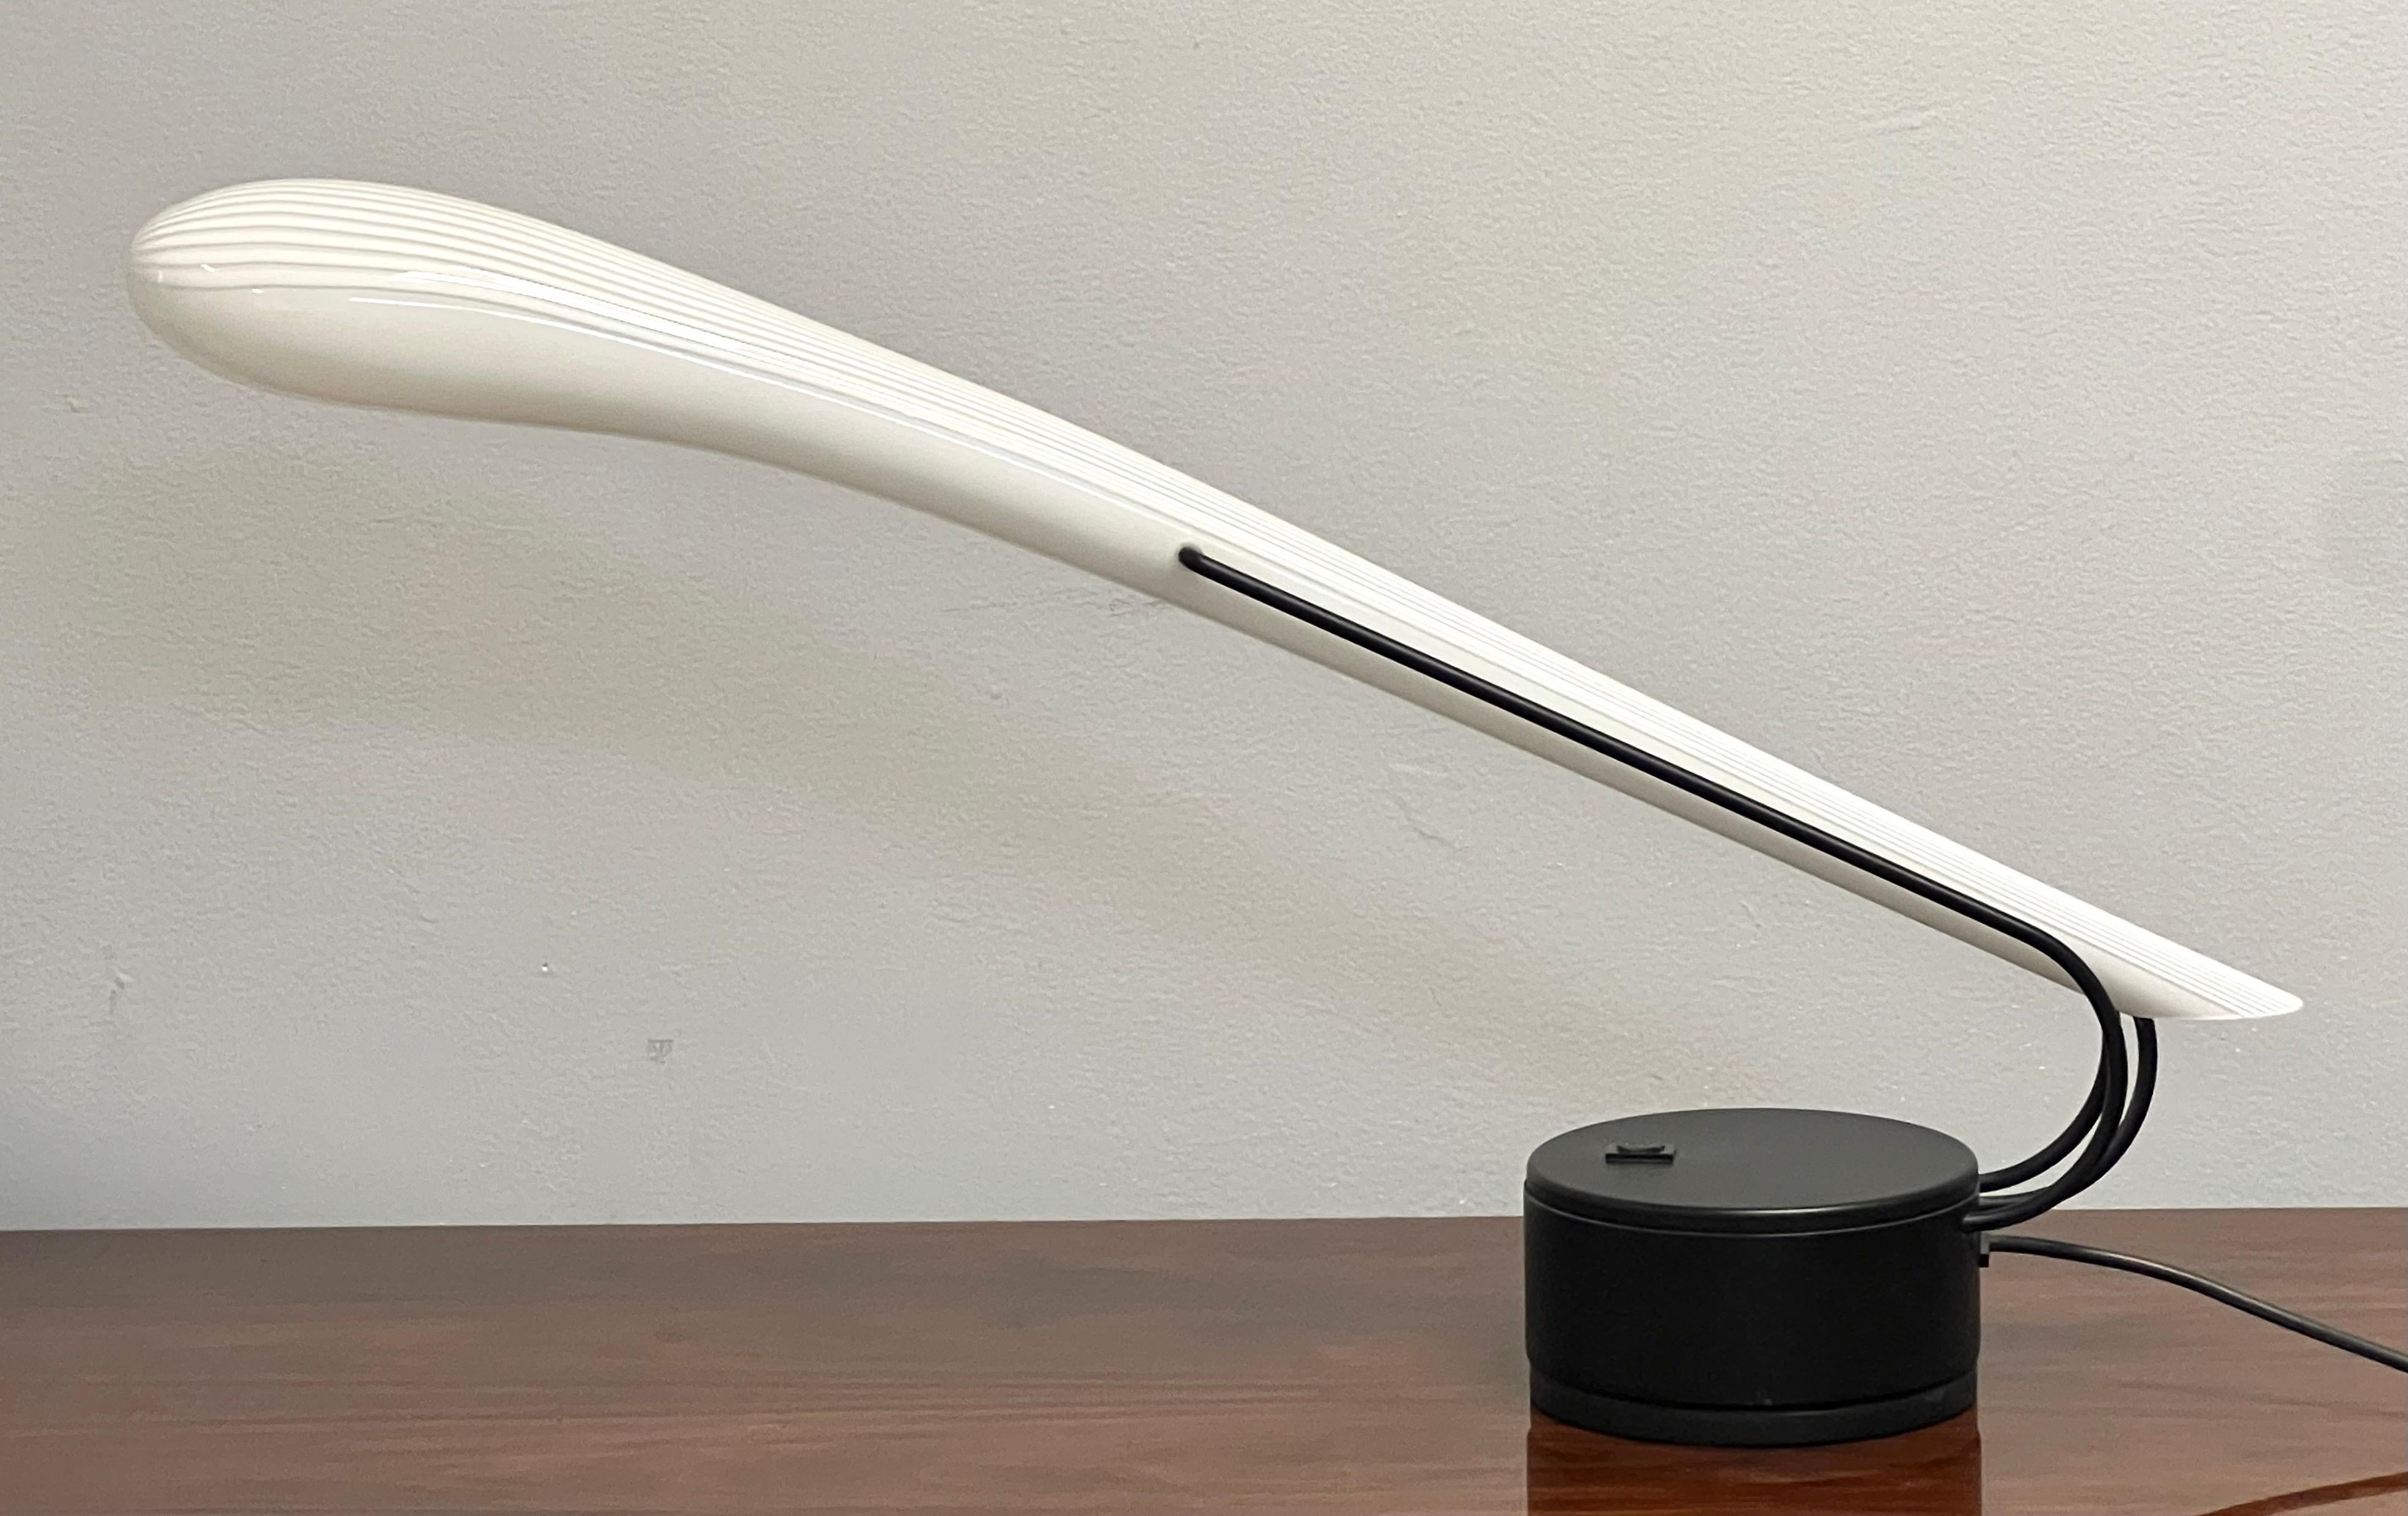 A rare example of a desk lamp by Vertri Murano. The whole body is a single piece of art glass mounted on a swiveling metal base. Crafted by Effetre International in a period of time when Lino Tagliapietra was the Artistic and Technical director,